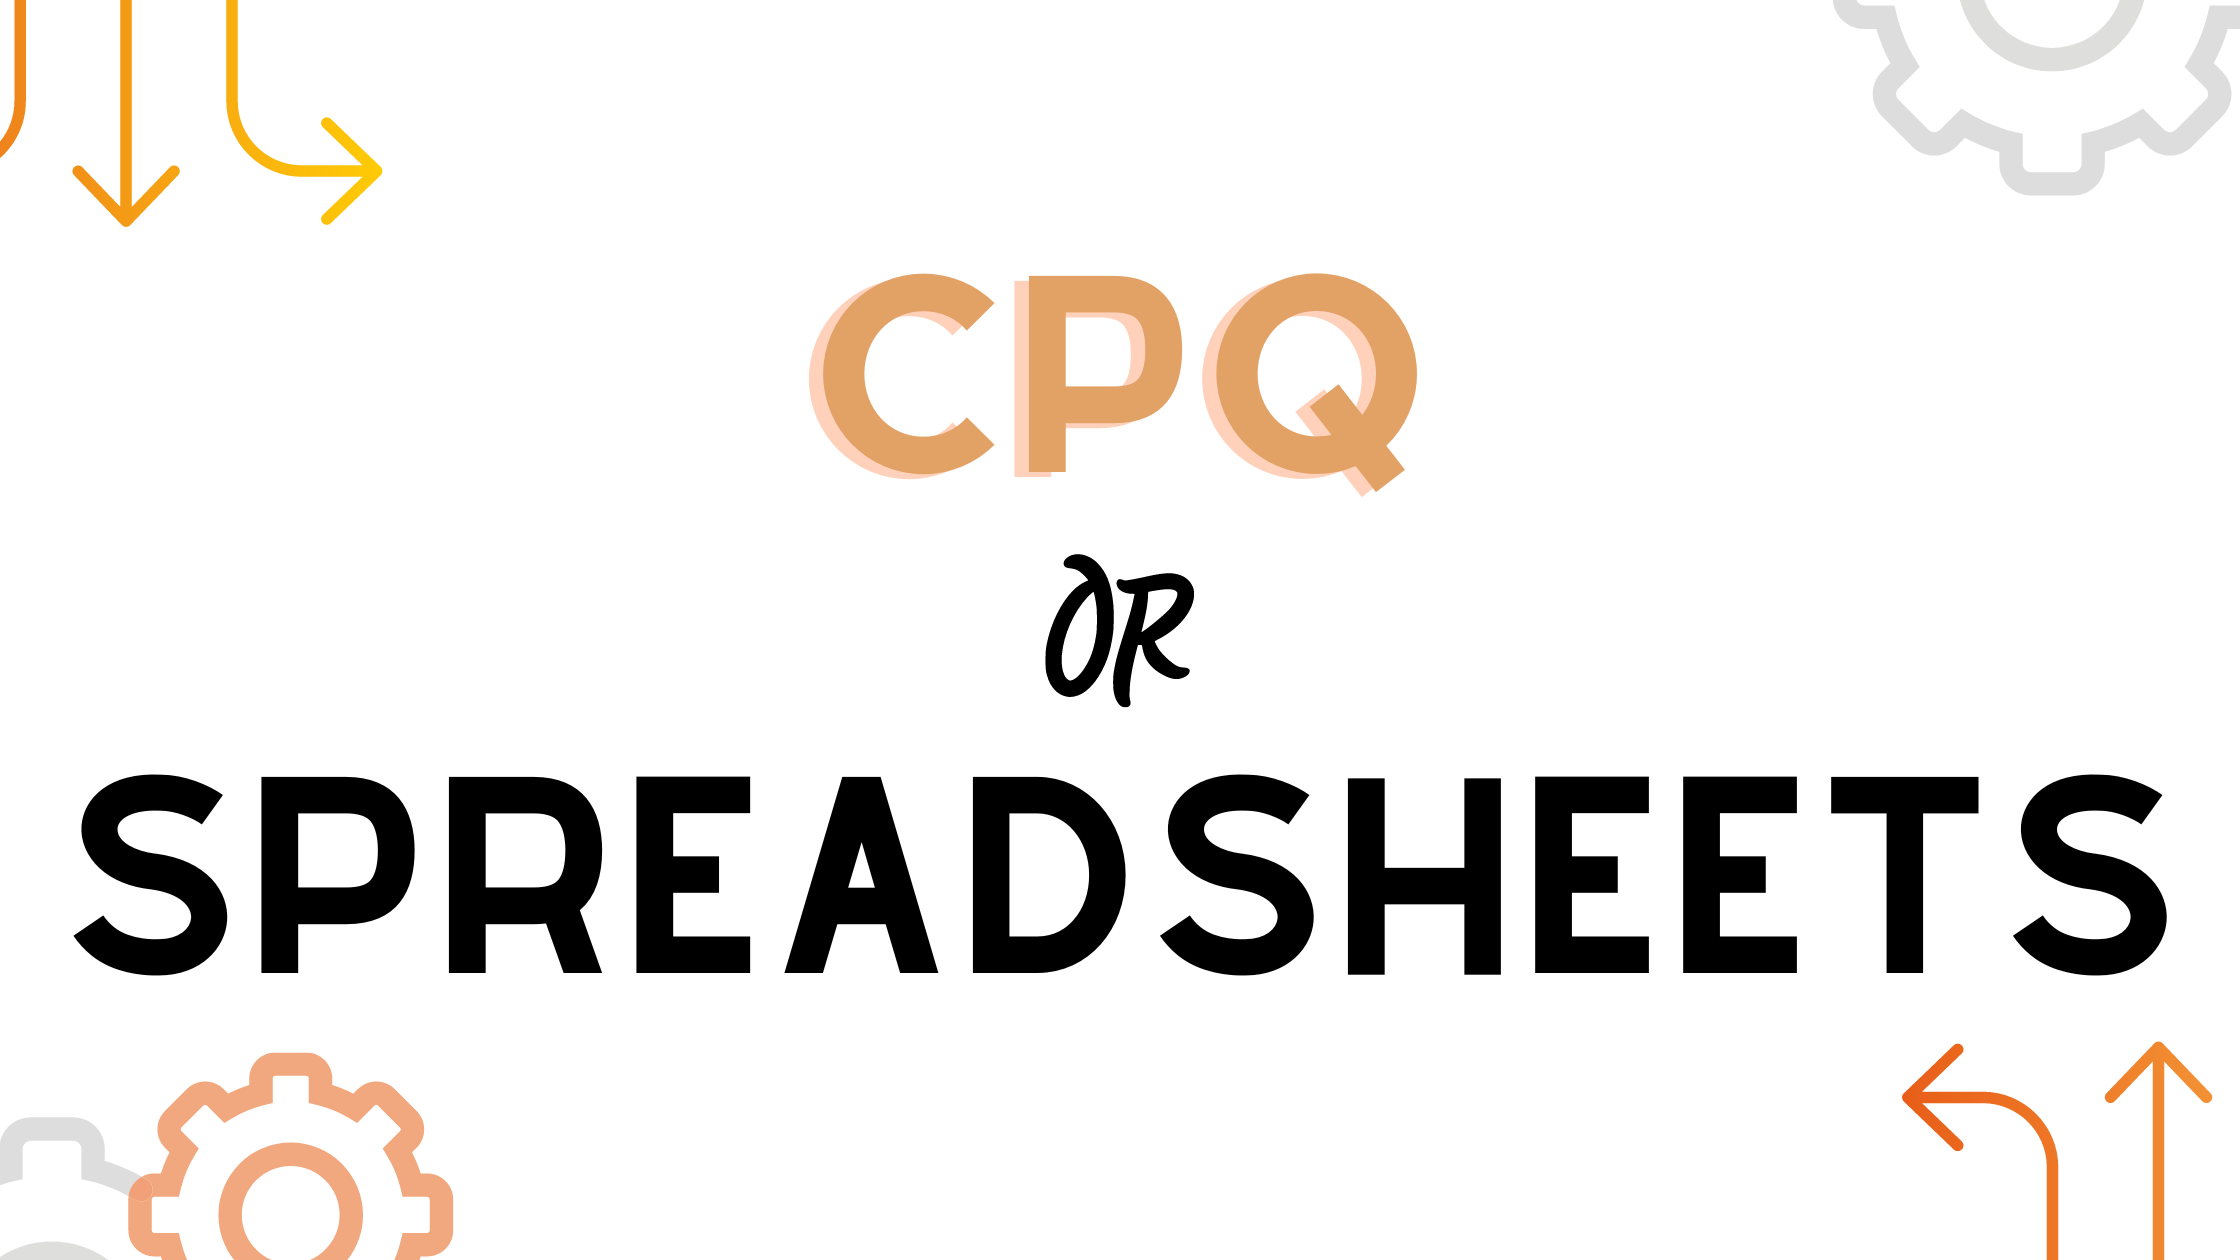 An image with a white background and displayed text that says "CPQ or Spreadsheets.